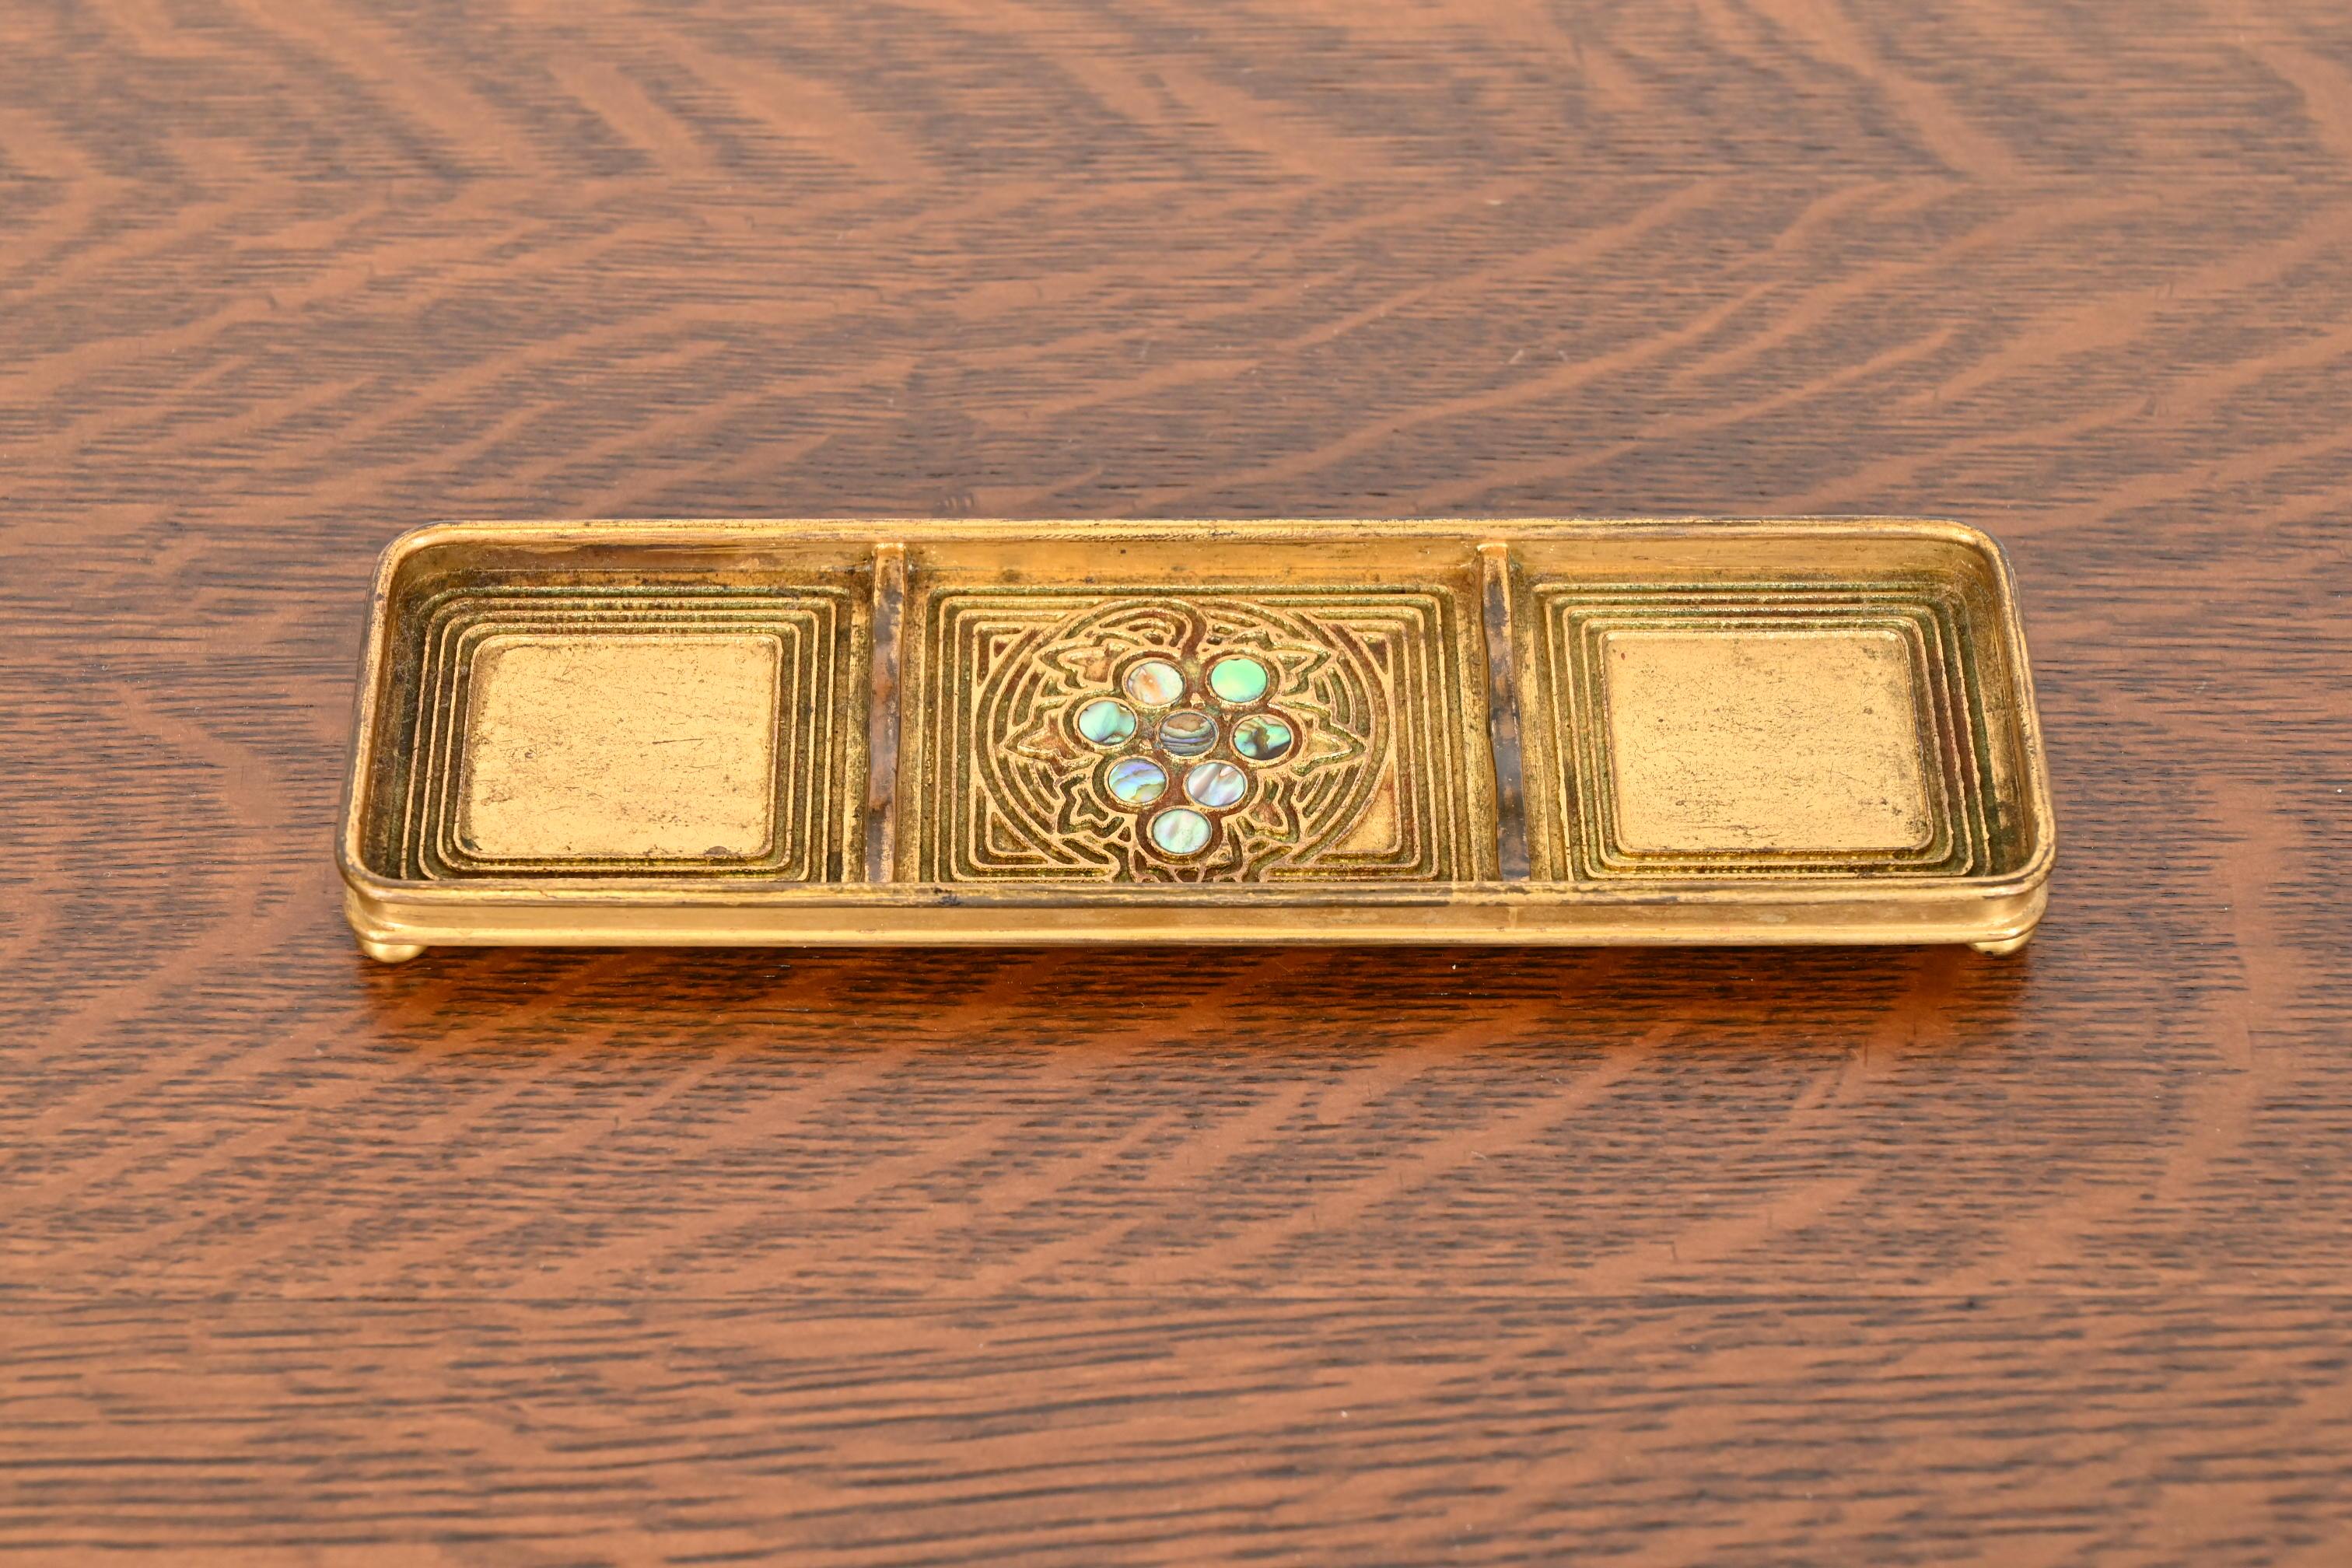 A gorgeous Arts & crafts period gilt bronze and inlaid abalone pen tray

By Tiffany Studios (signed to the underside)

New York, USA, Early 20th Century

Measures: 8.75